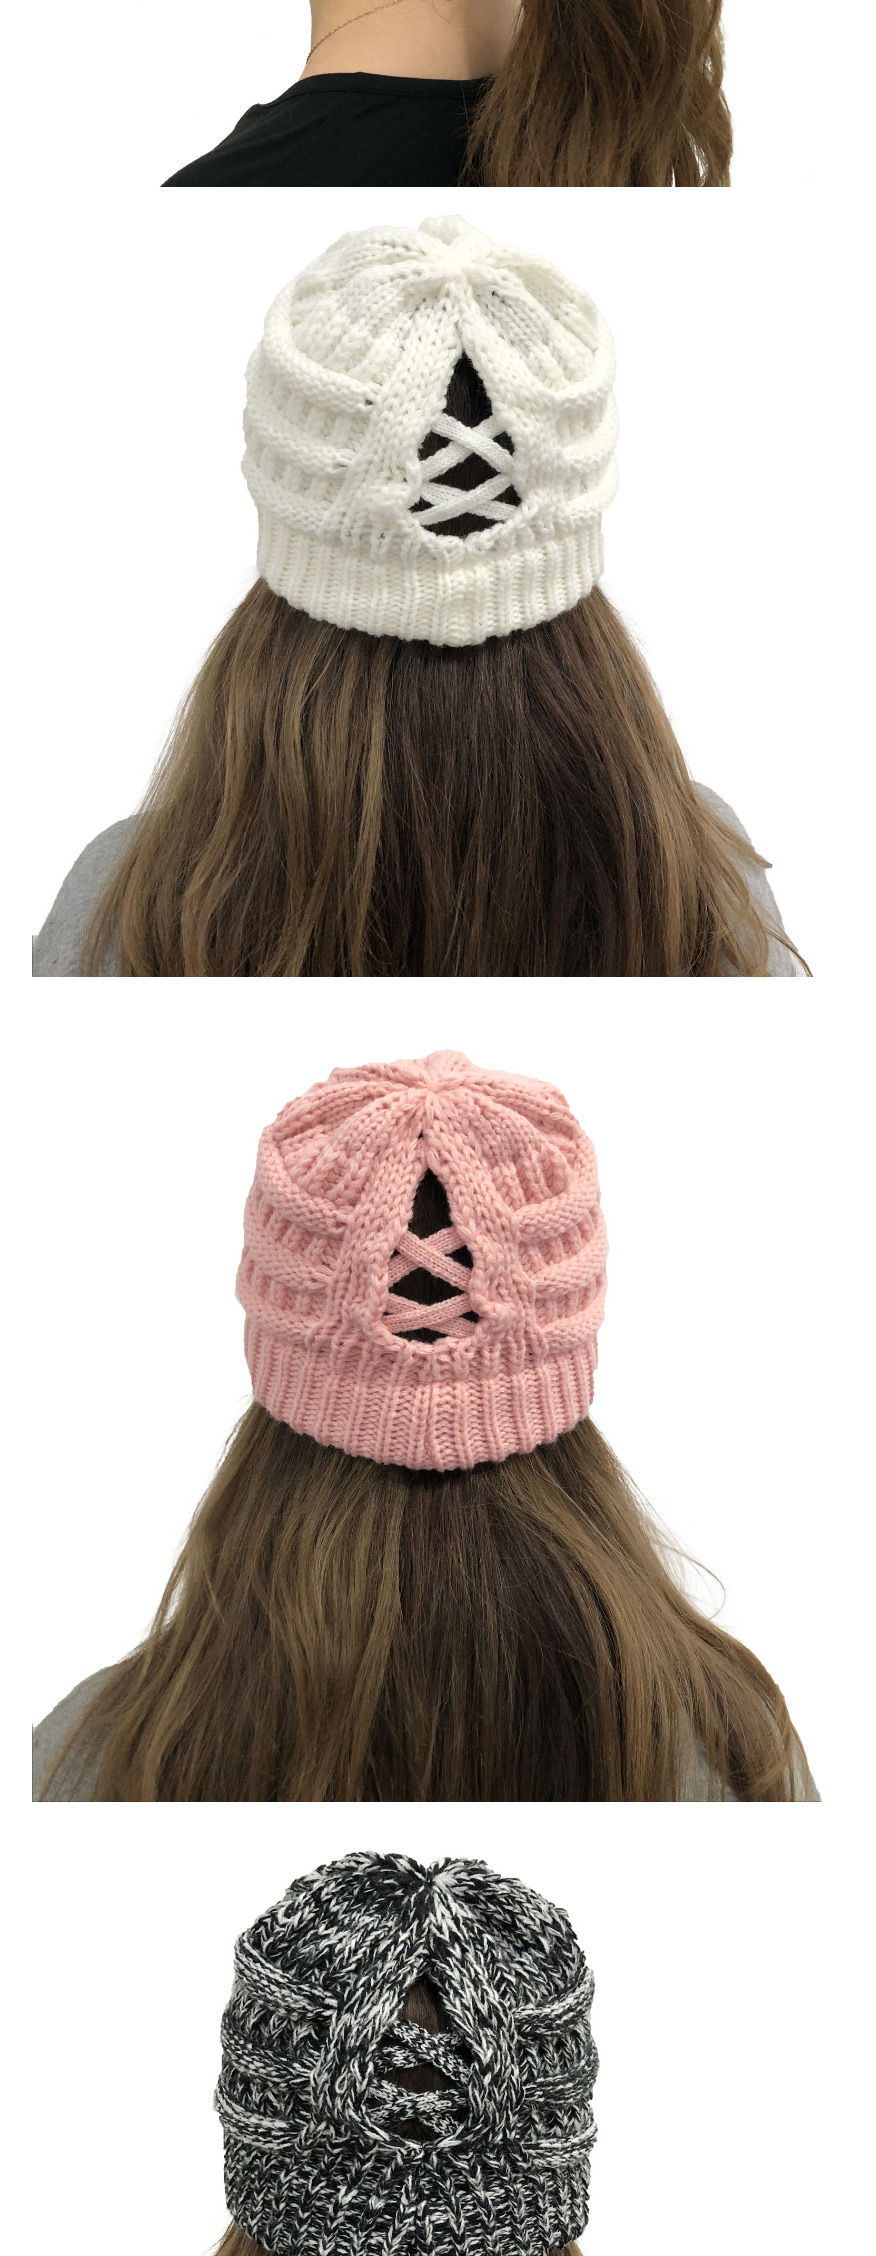 Fashion Meter Button Detachable Cross-back Ponytail Knitted Hat,Knitting Wool Hats